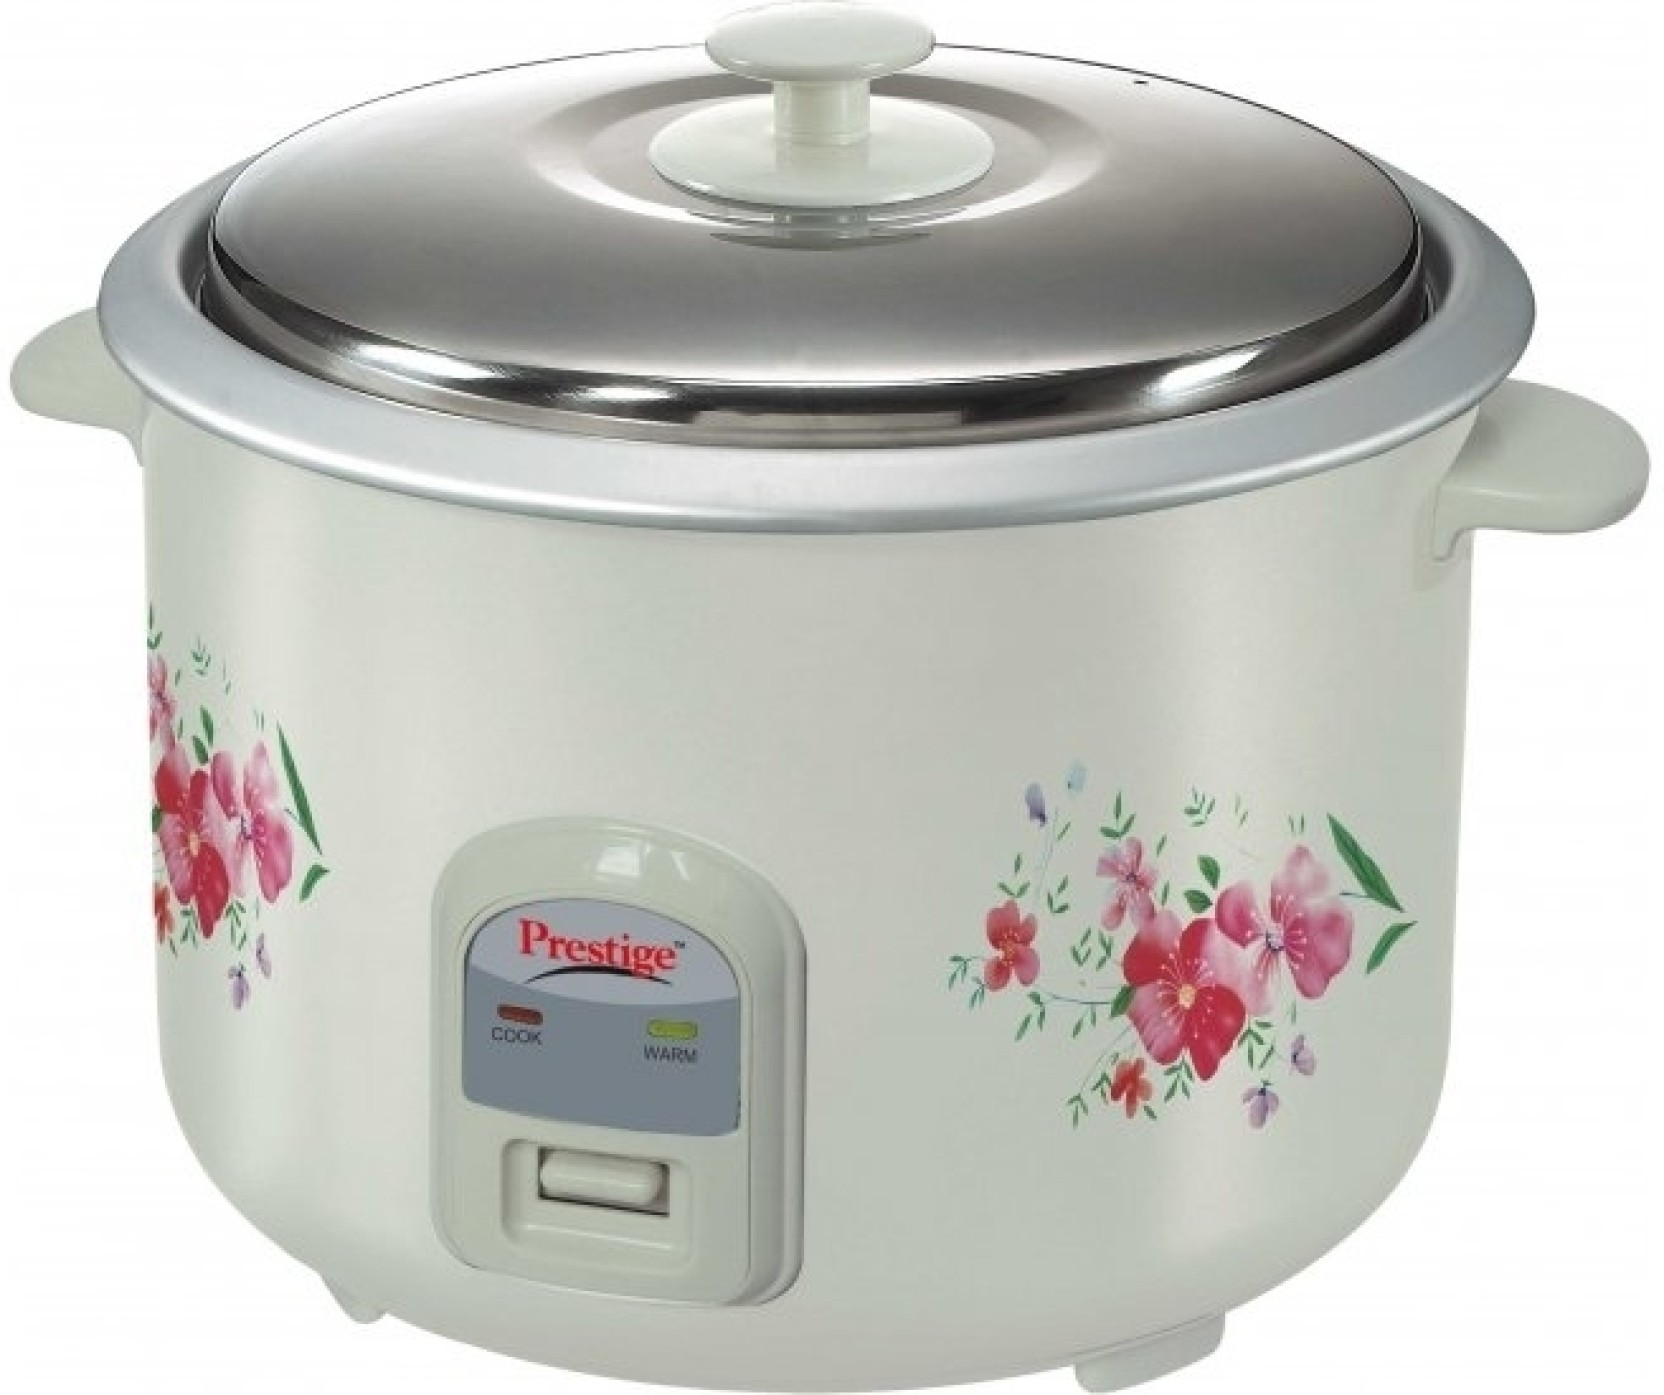 Prestige PRWO 2.8-2 Electric Rice Cooker with Steaming ...